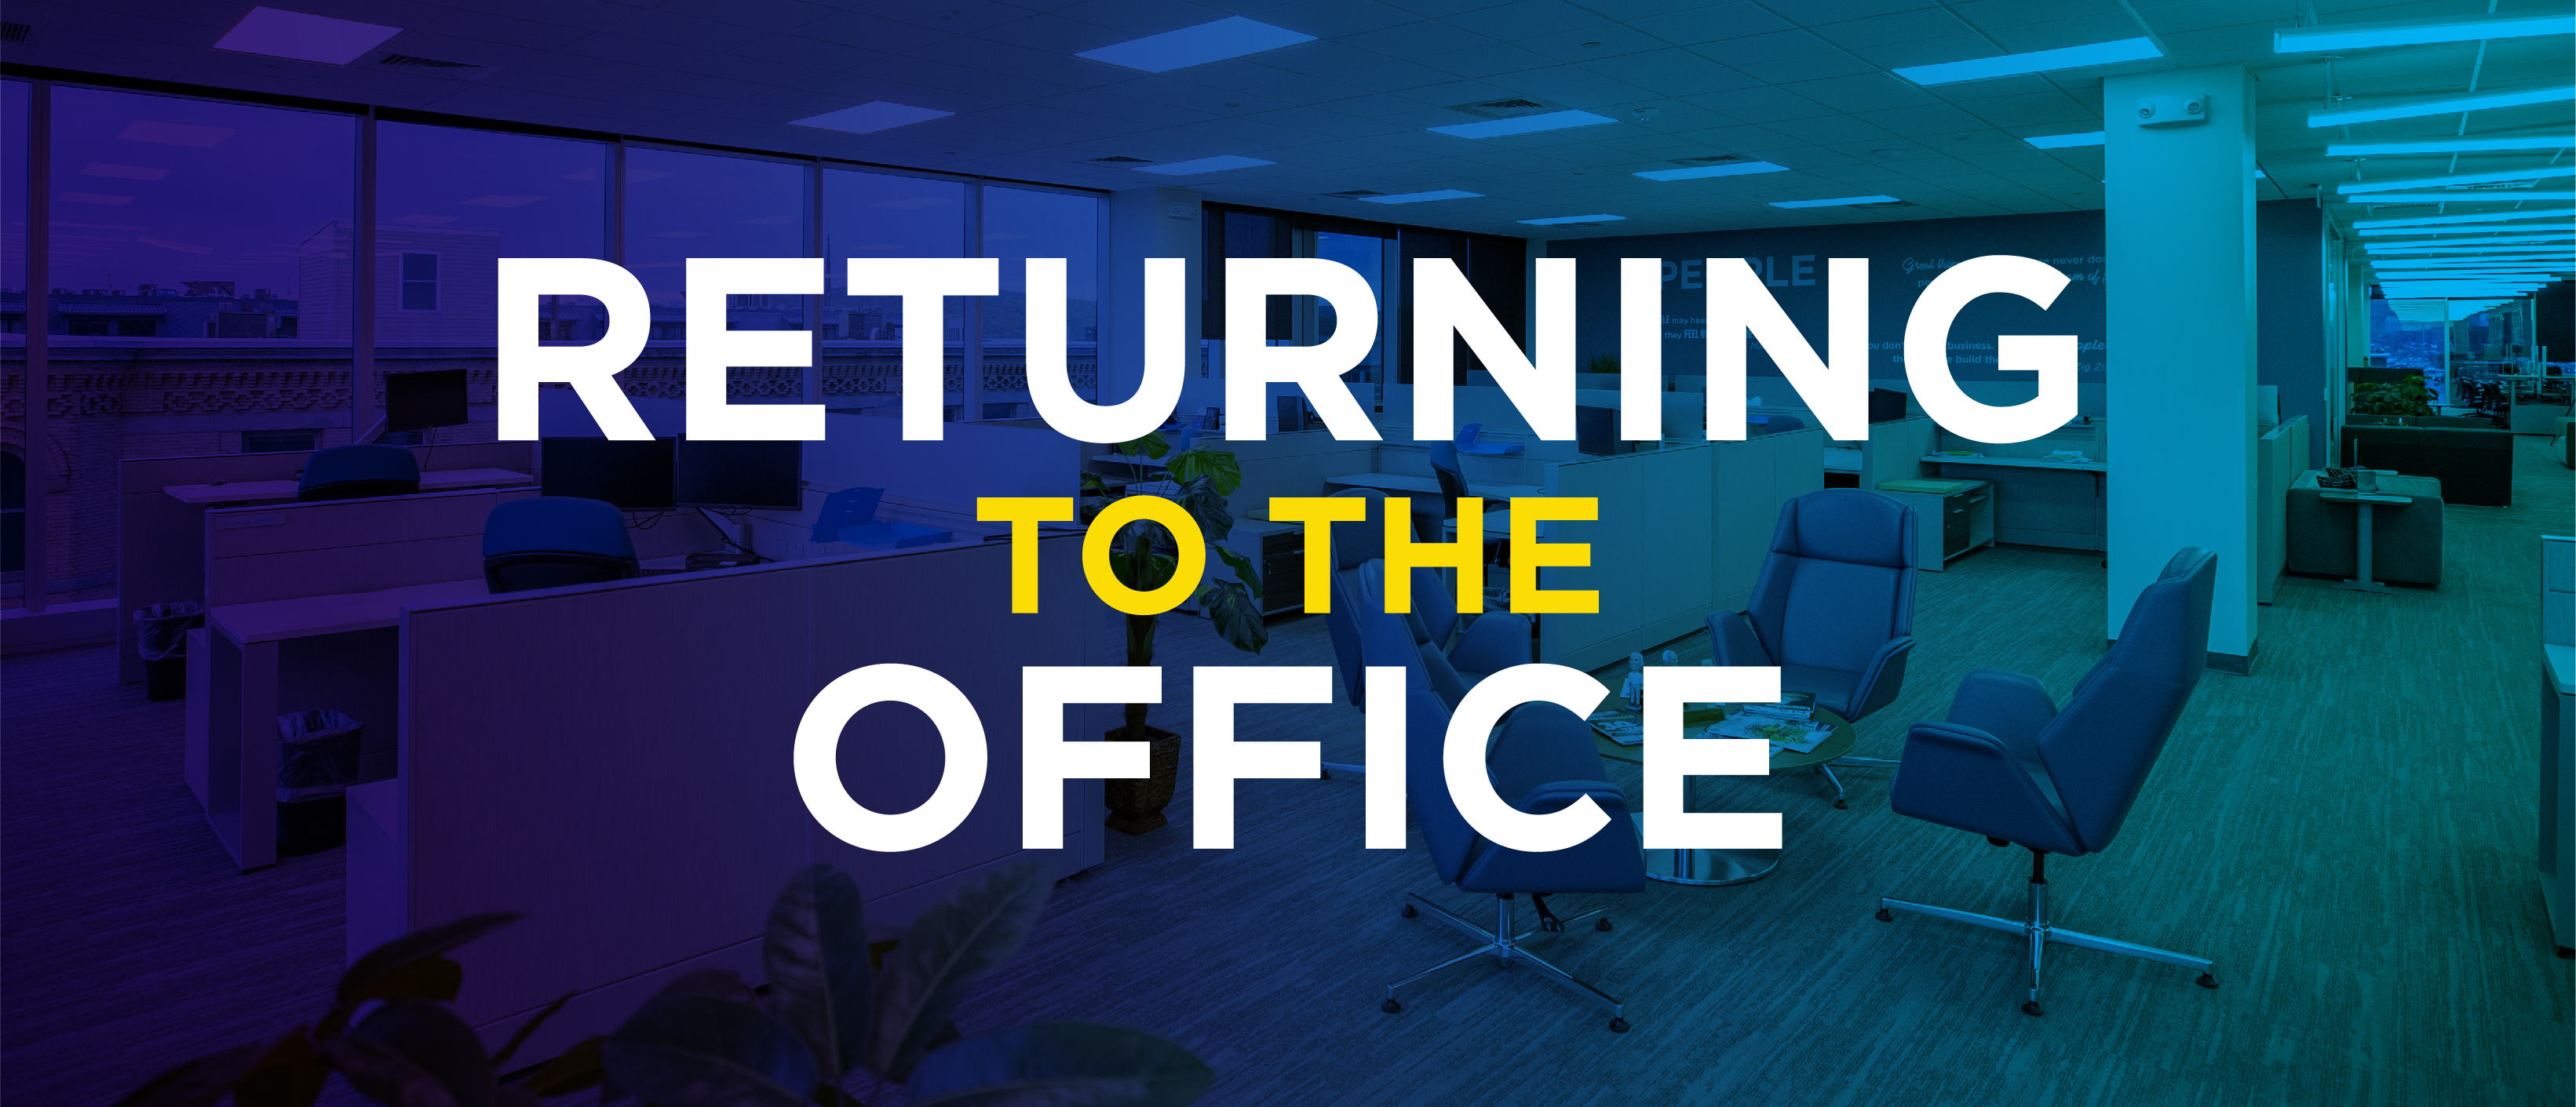 Return to the Office